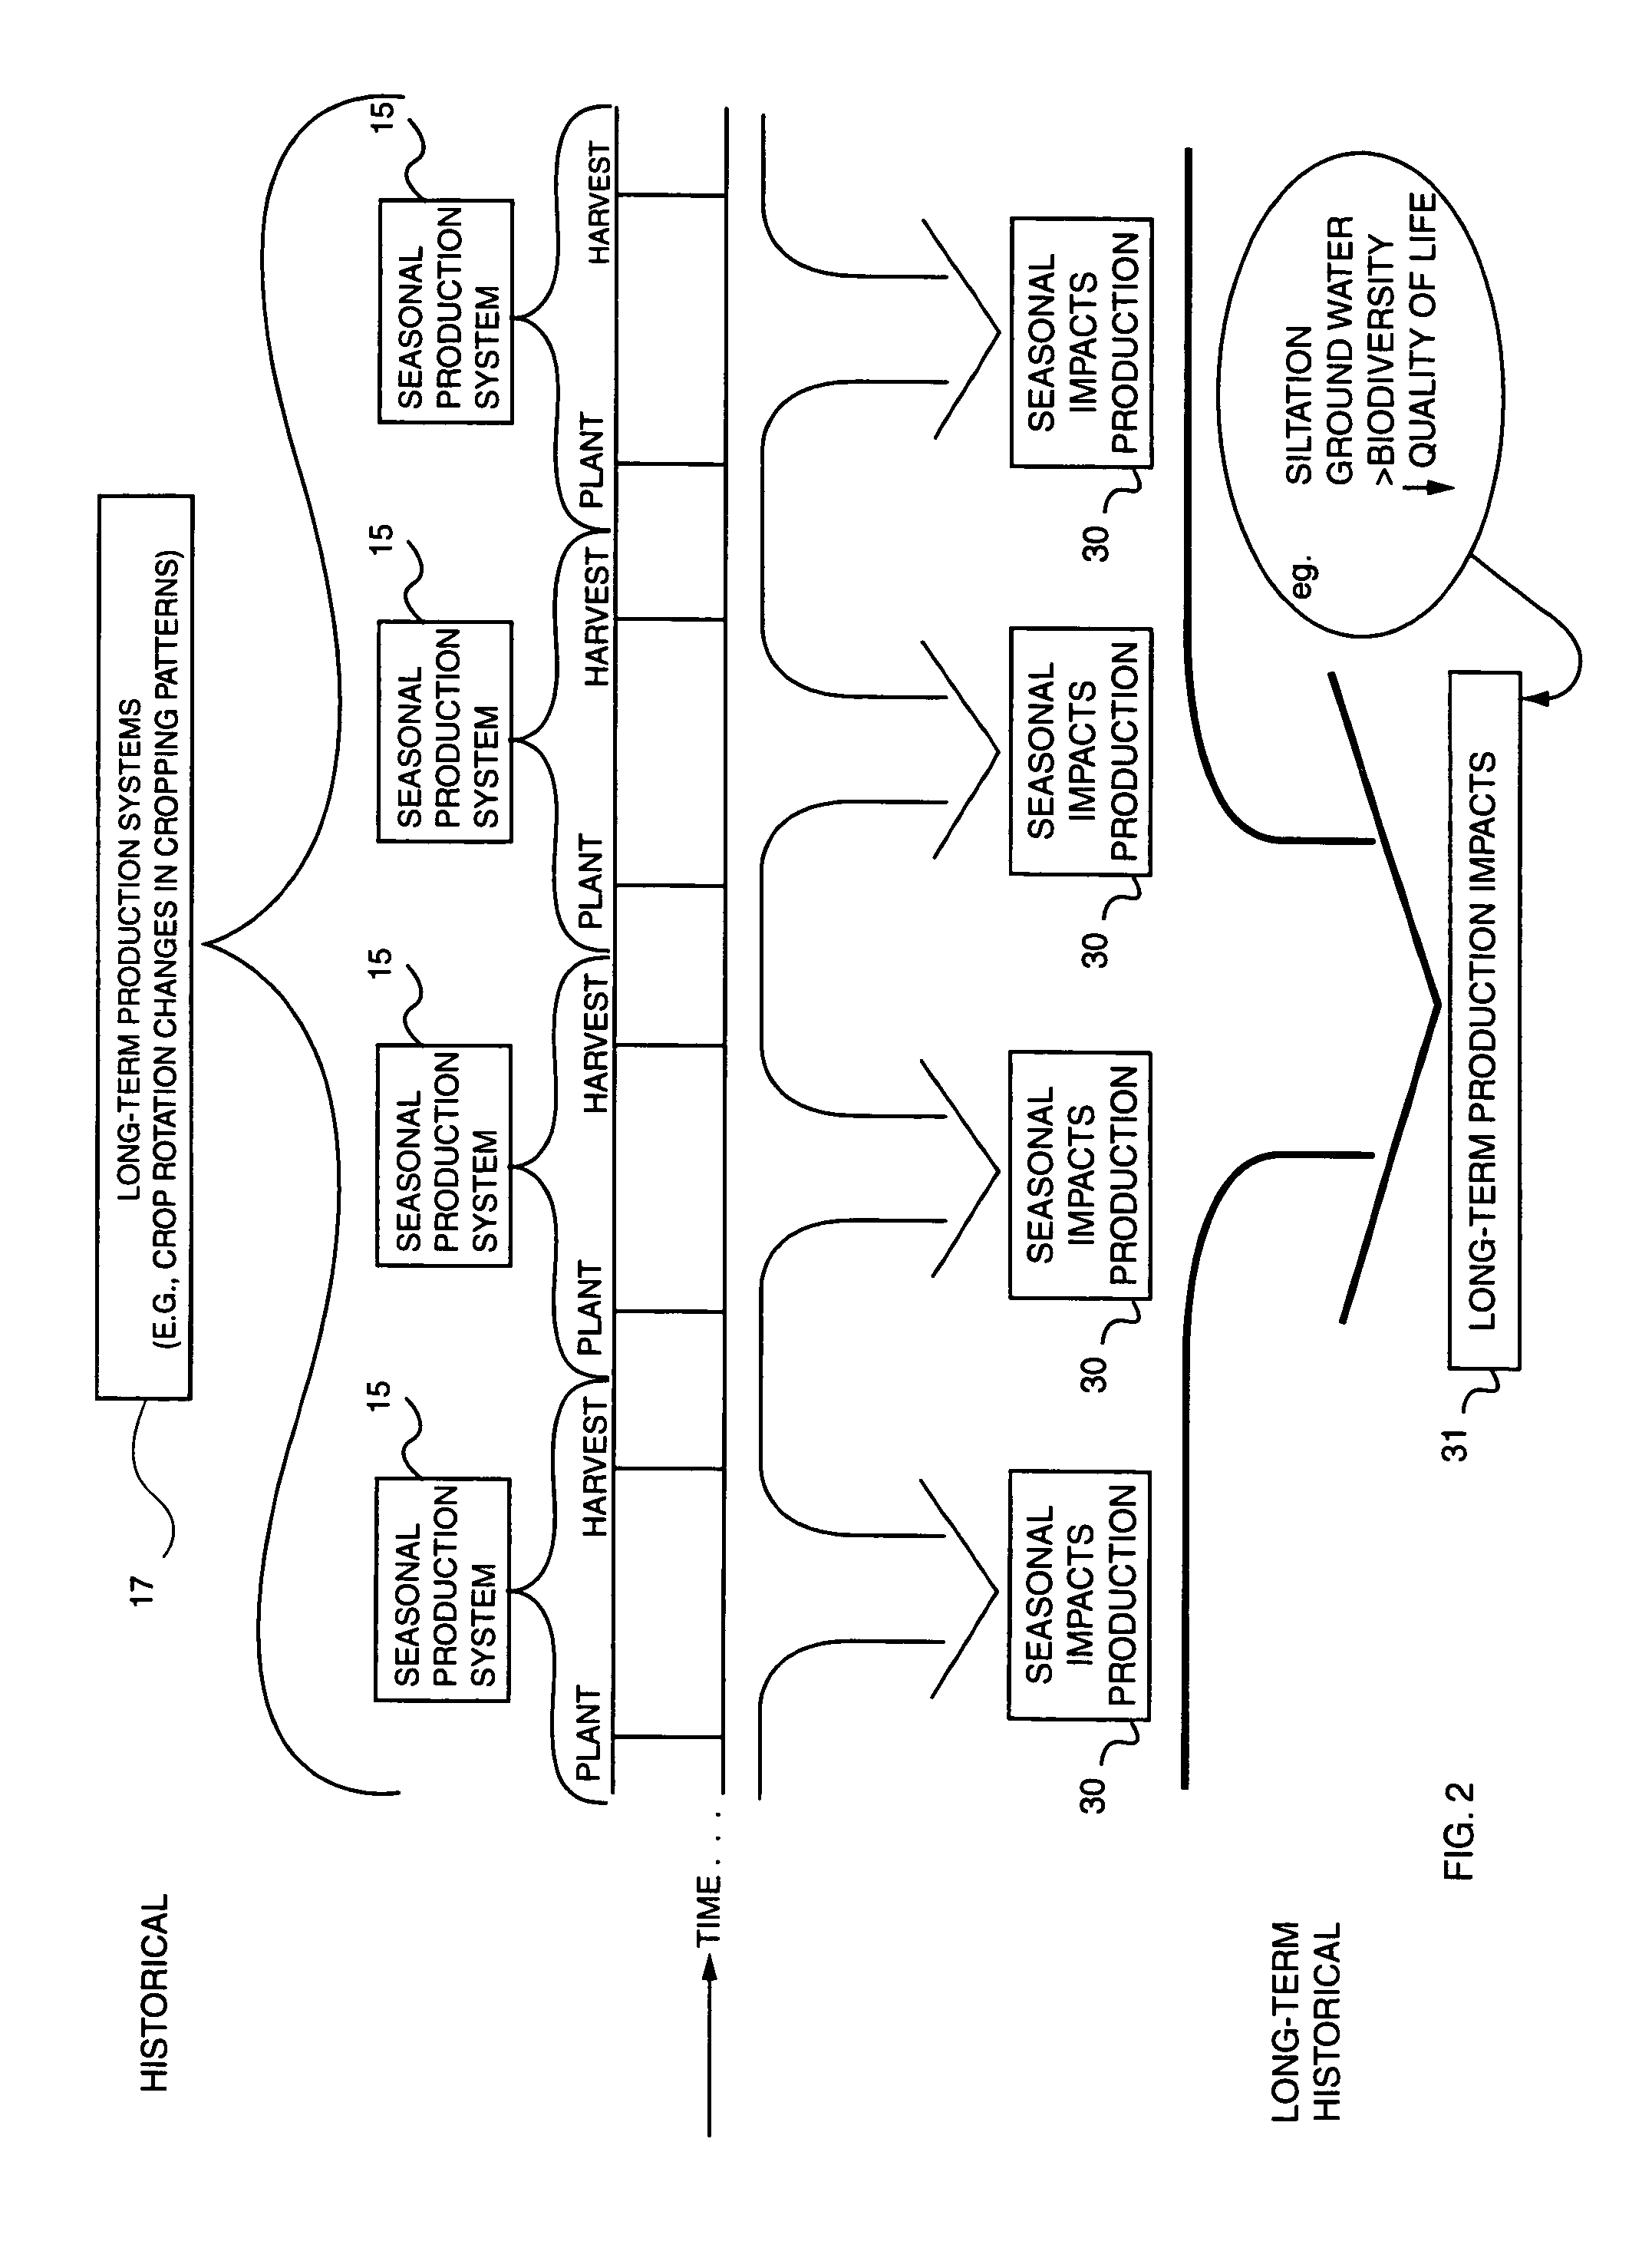 Method and system to communicate agricultural product information to a consumer